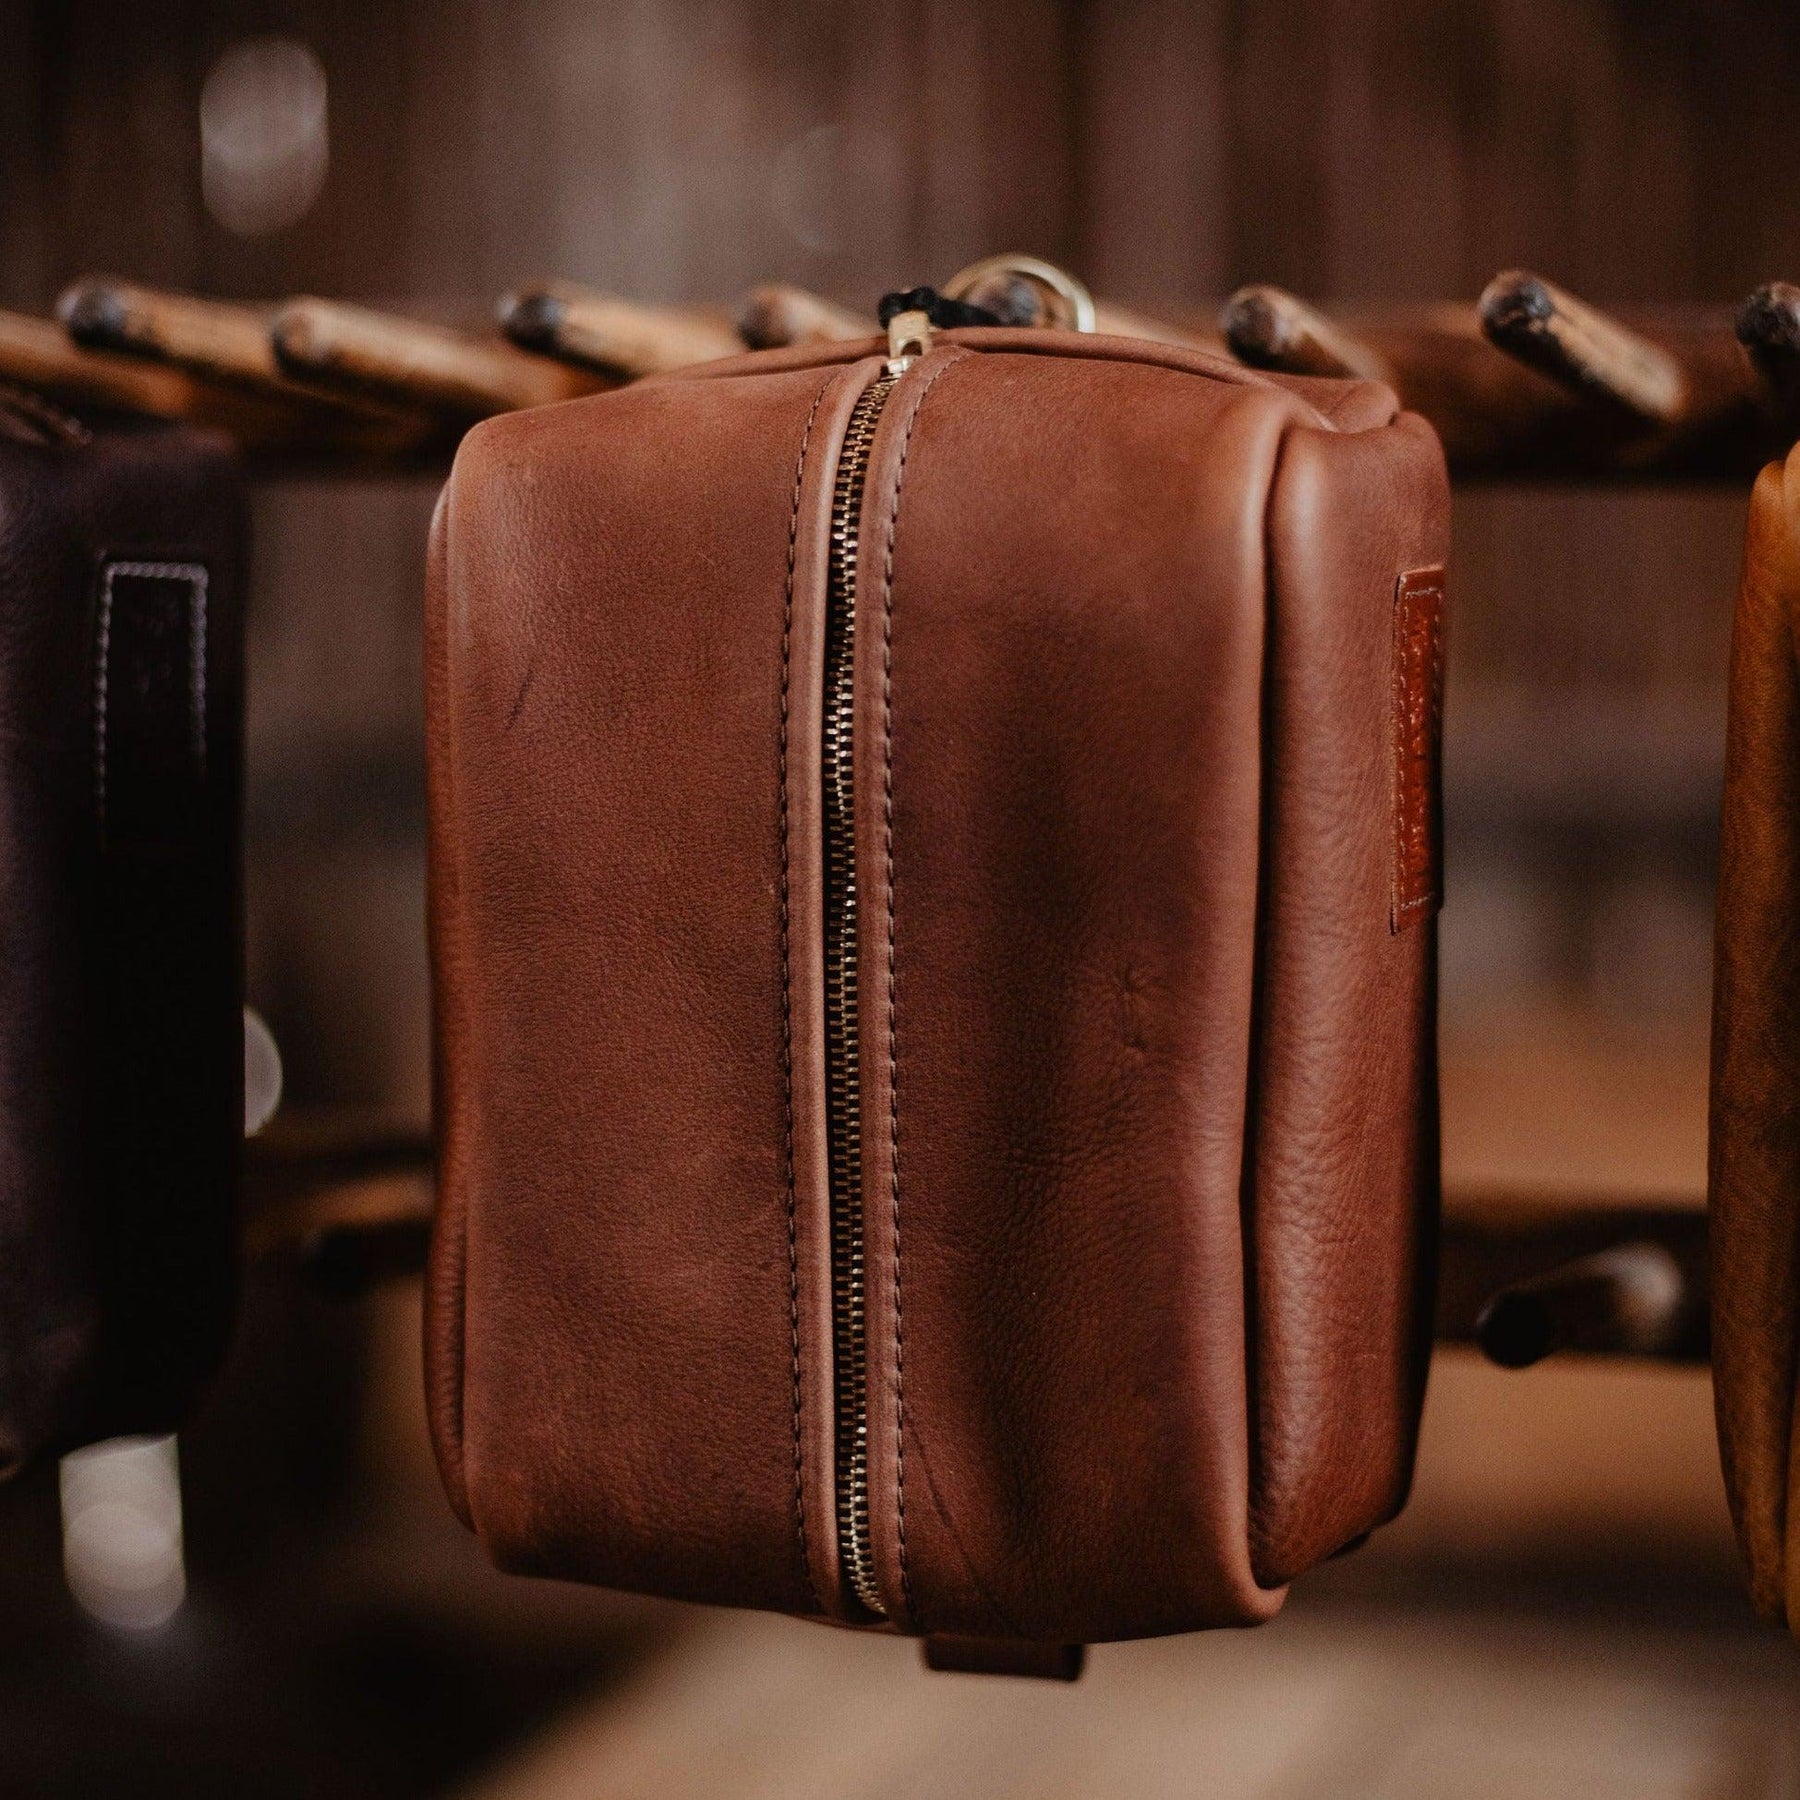 Tandy Leather - A durable Dopp kit is essential when traveling! This custom  leather Maker's Leather Supply original has a vintage look you can custom  make for a leather lover. #TandyLeather